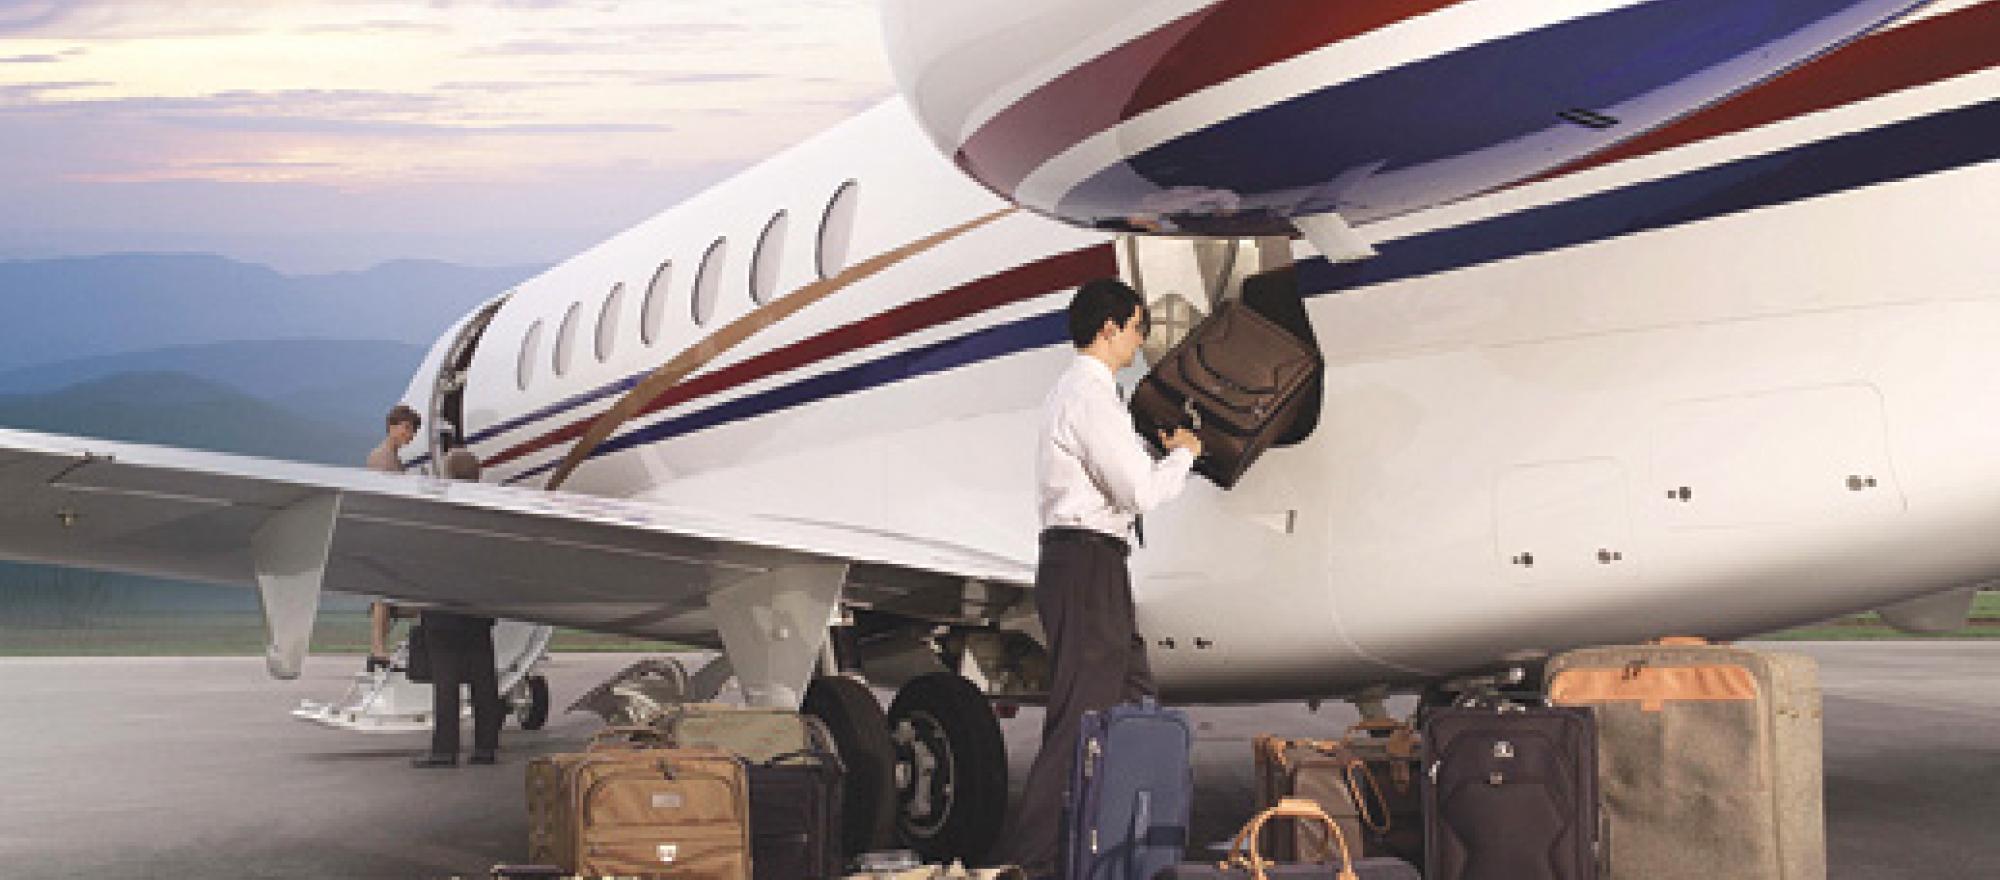 The Hawker 4000 features a 100-cubic-foot baggage compartment, a comfortable 